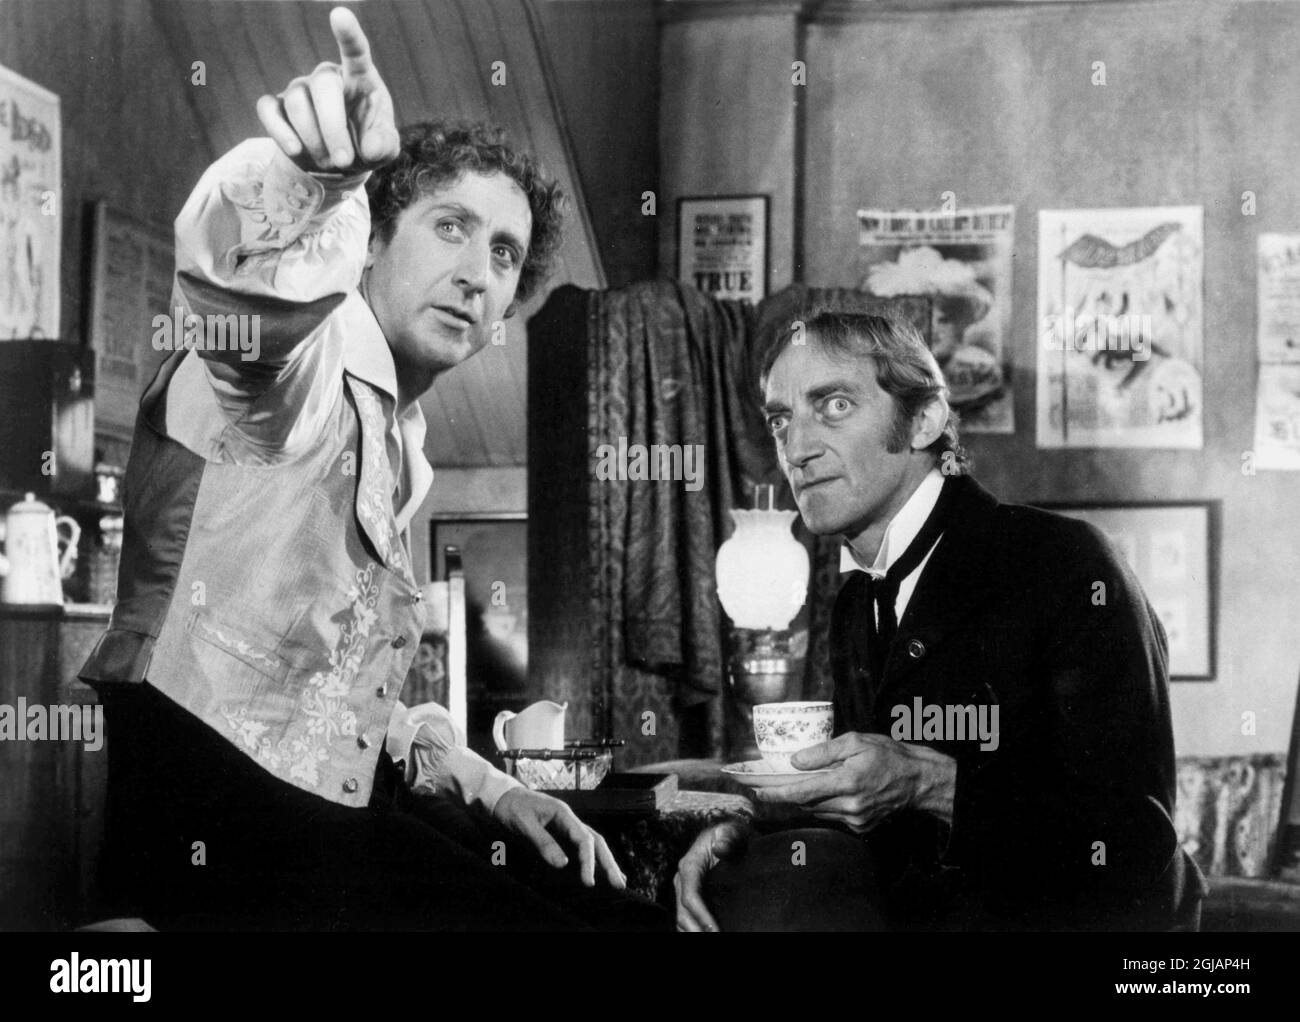 1700218 Le frere le plus fute de Sherlock Holmes The Adventure of Sherlock Holmes' Smarter Brother de GeneWilder avec Marty Feldman 1975; (add.info.: Le frere le plus fute de Sherlock Holmes The Adventure of Sherlock Holmes' Smarter Brother de GeneWilder avec Marty Feldman 1975);  it is possible that some works by this artist may be protected by third party rights in some territories. Stock Photo